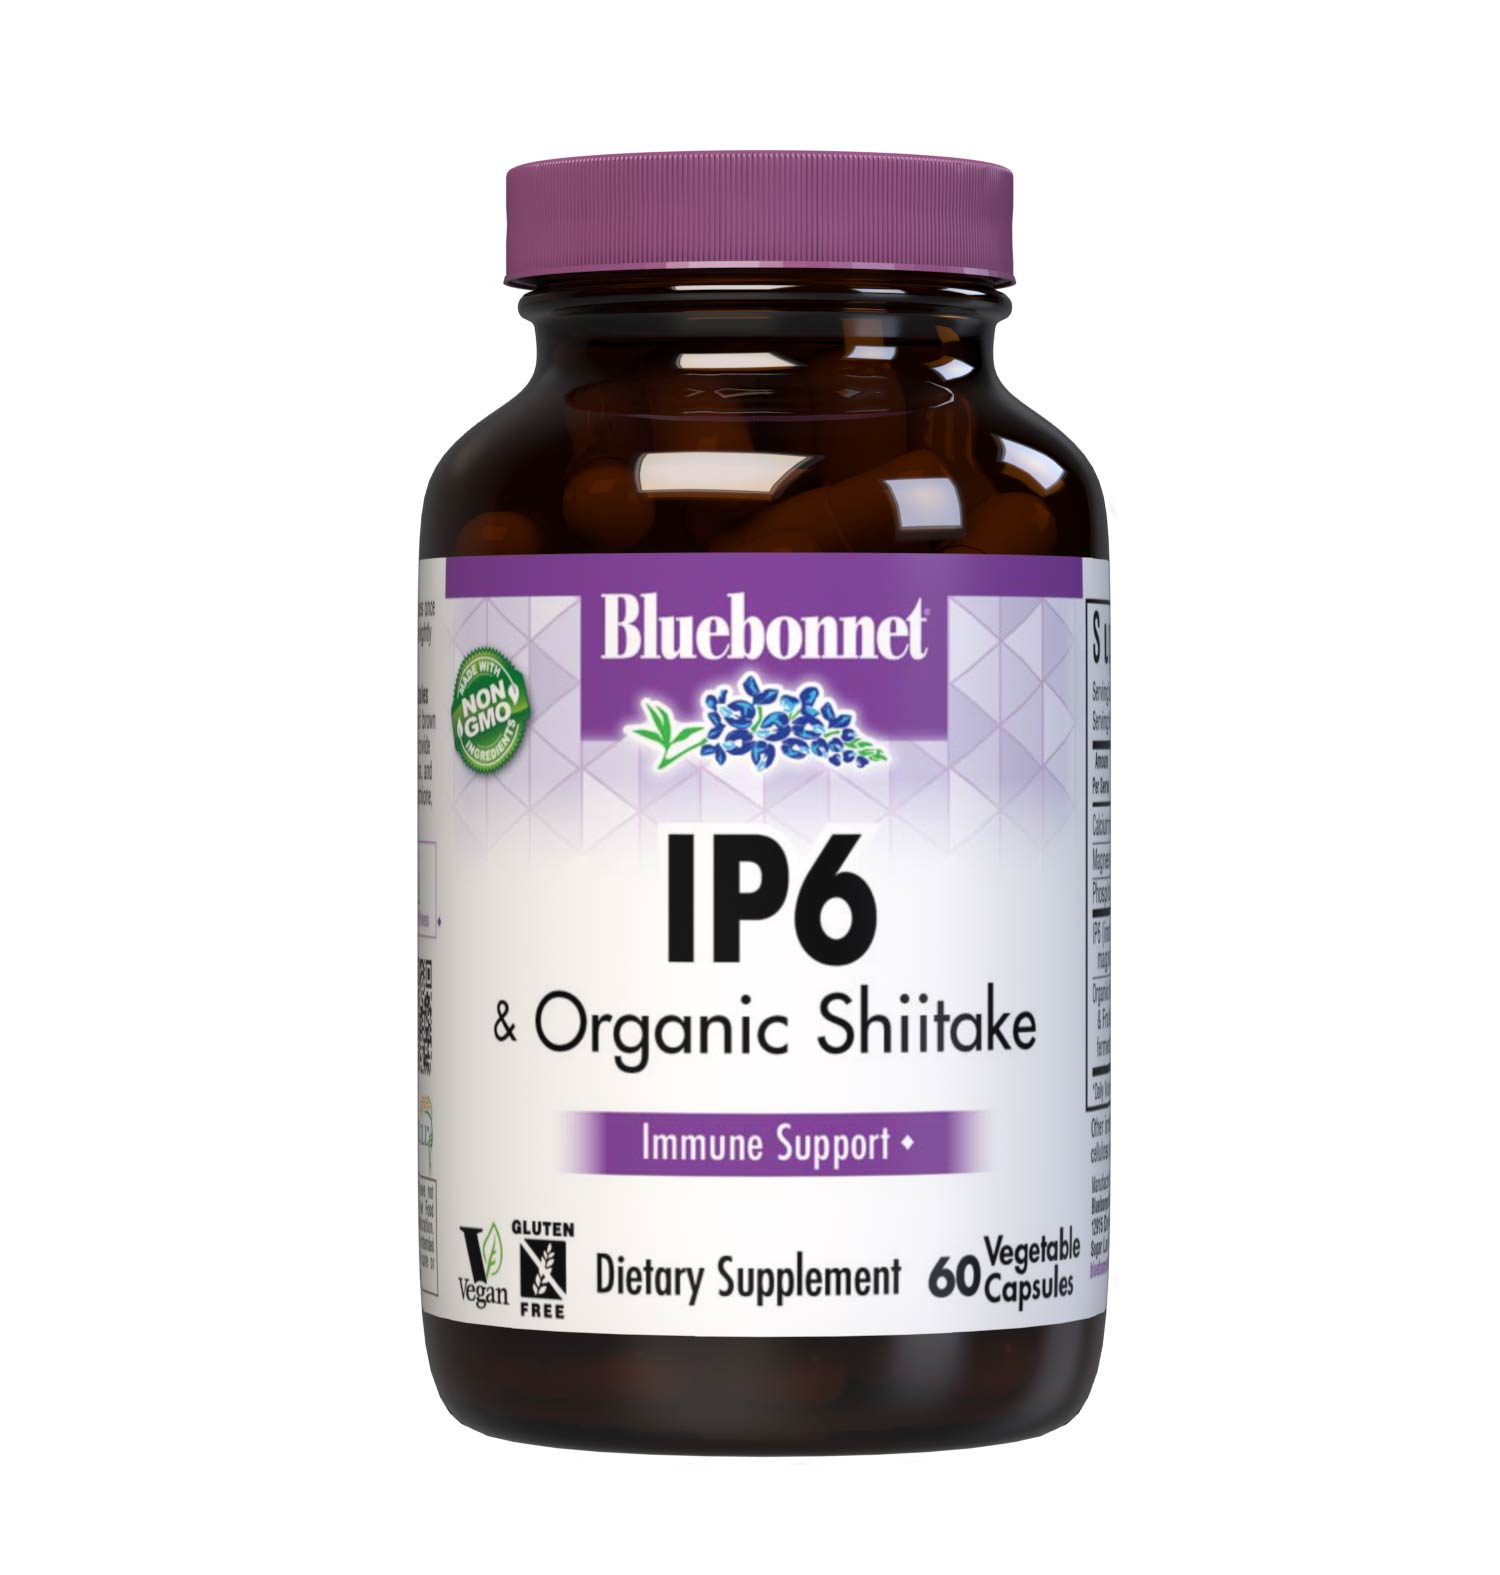 Bluebonnet’s IP6 & Organic Shiitake 60 Vegetable Capsules are specially formulated with a complementary blend of brown rice extract and organic shiitake mushrooms, which provide an inherent source of minerals, beta-glucans, prebiotics, and an array of cellular protective nutrients including glutathione, as well as SOD (superoxide dismutase). #size_60 count